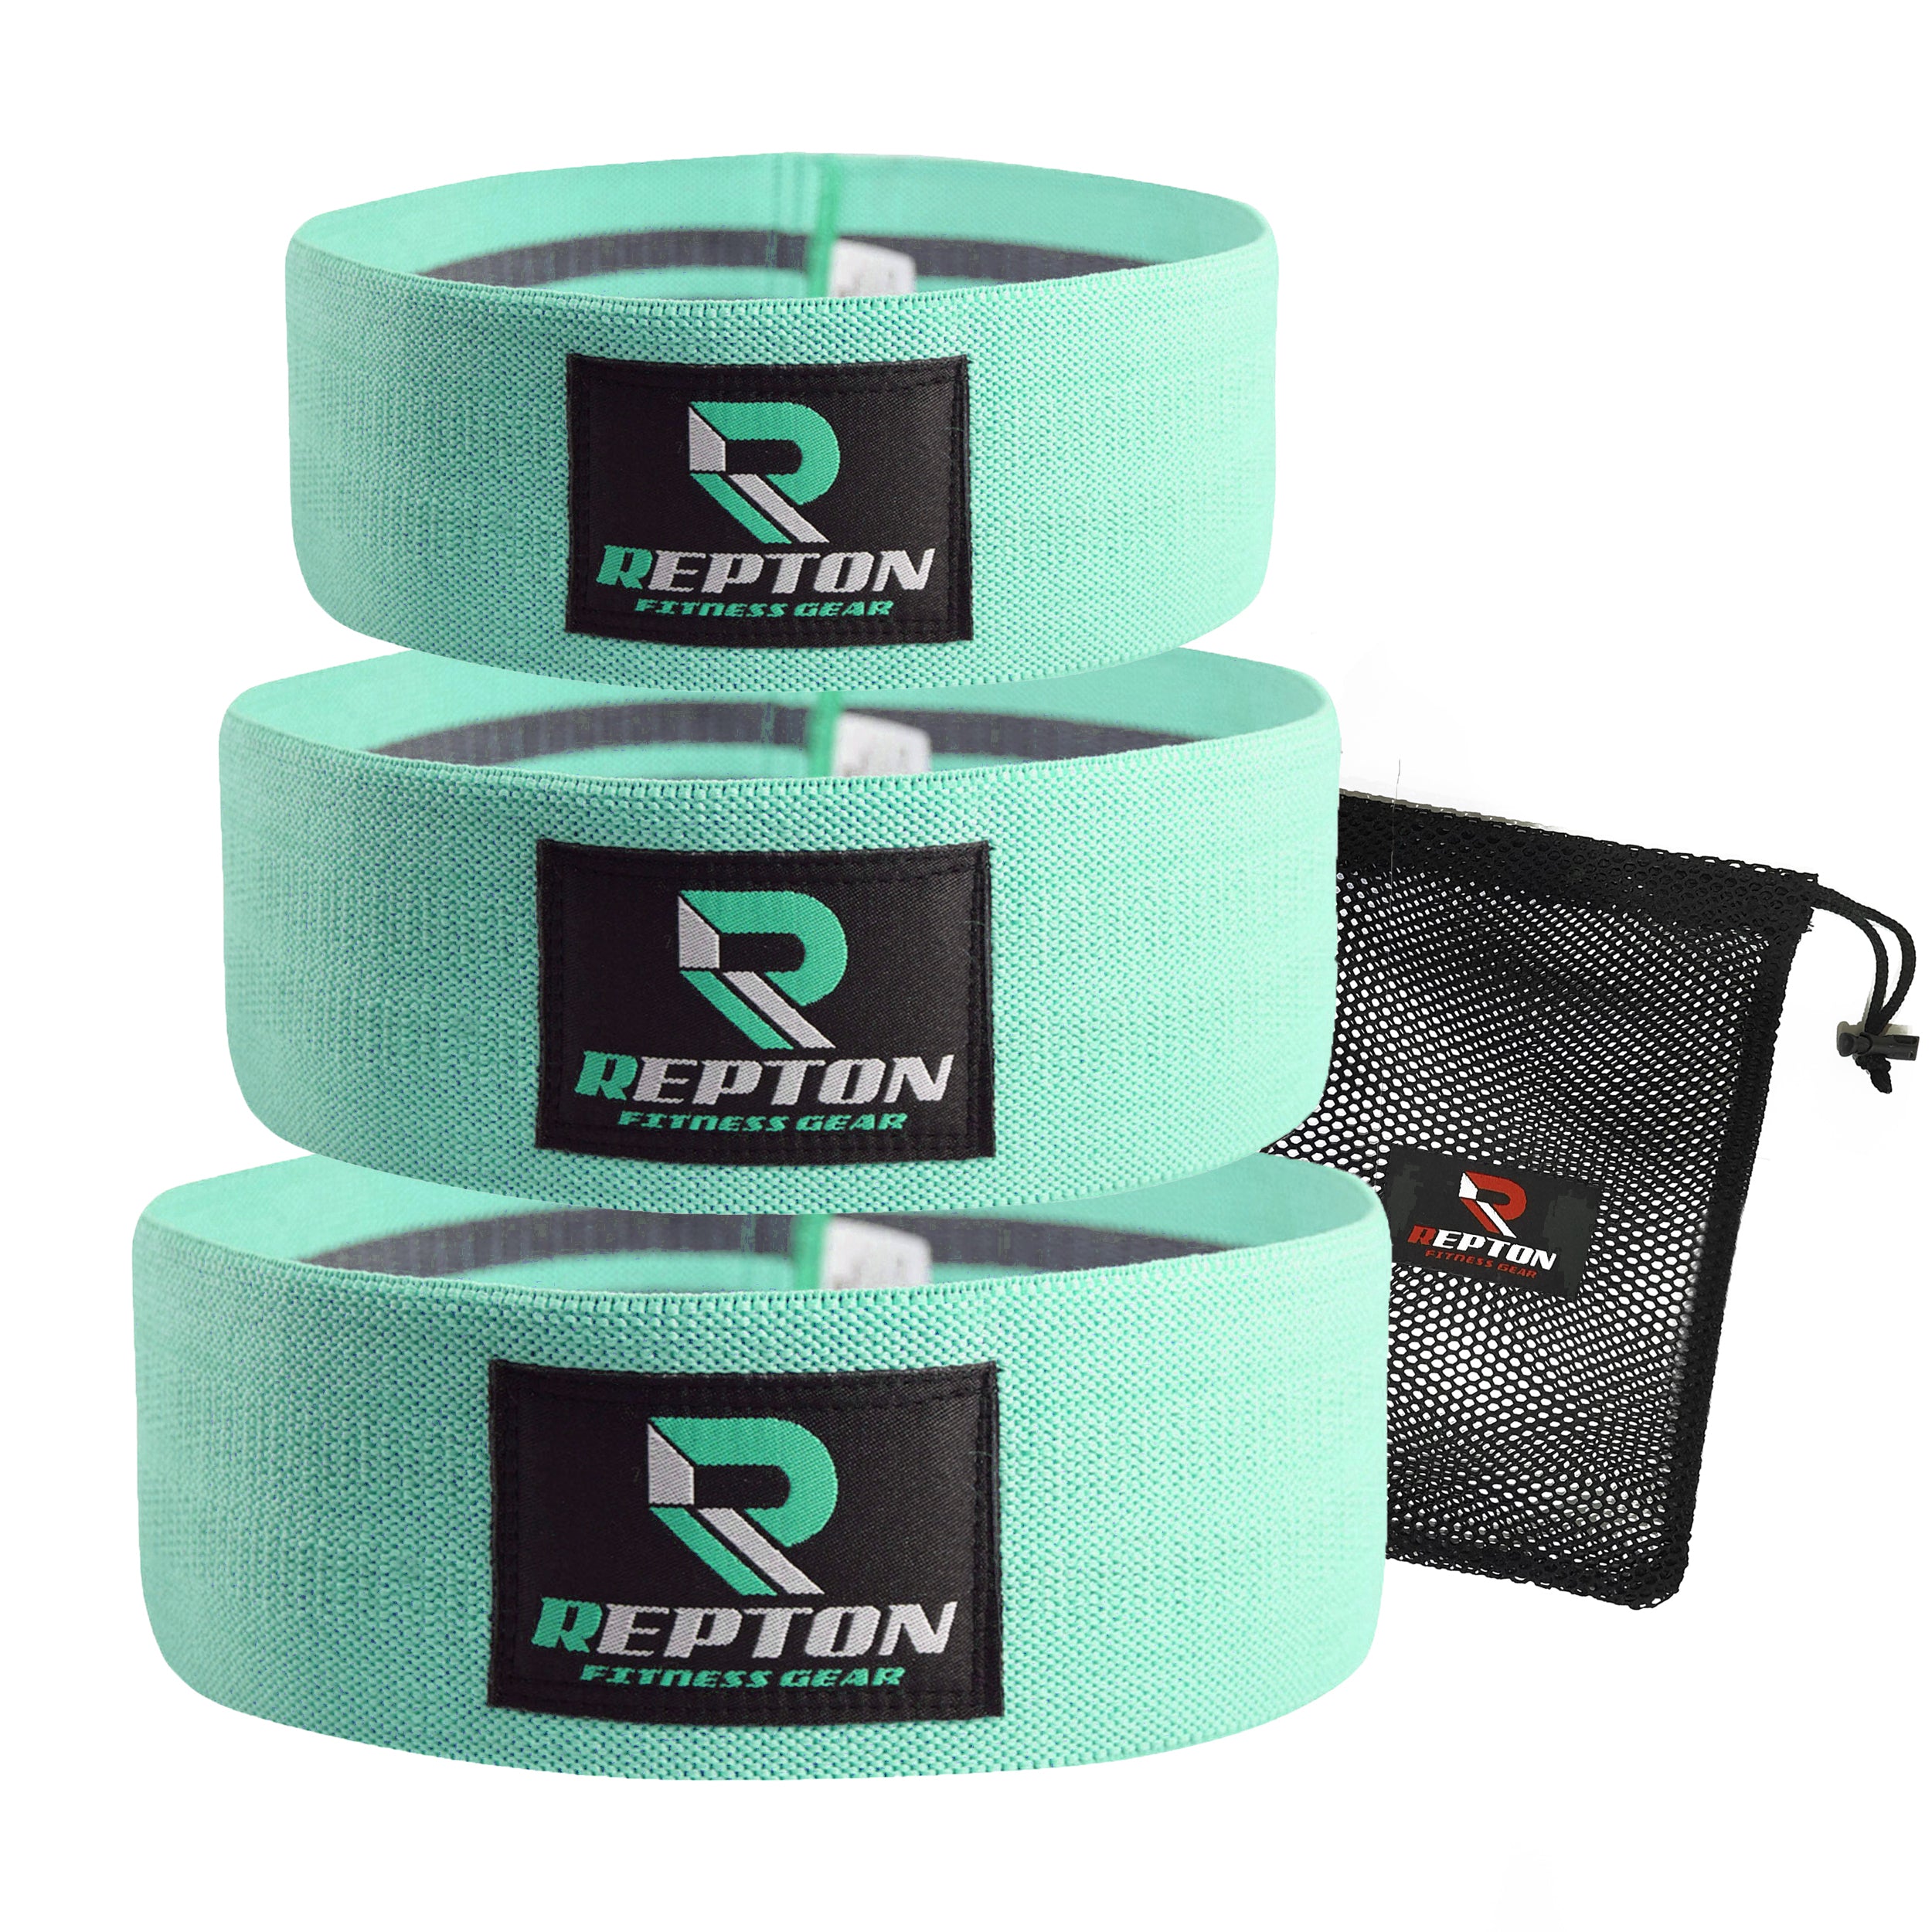 3 Sets Resistance Bands for Glutes, Hips and Legs Exercise Repton Fitness Gear